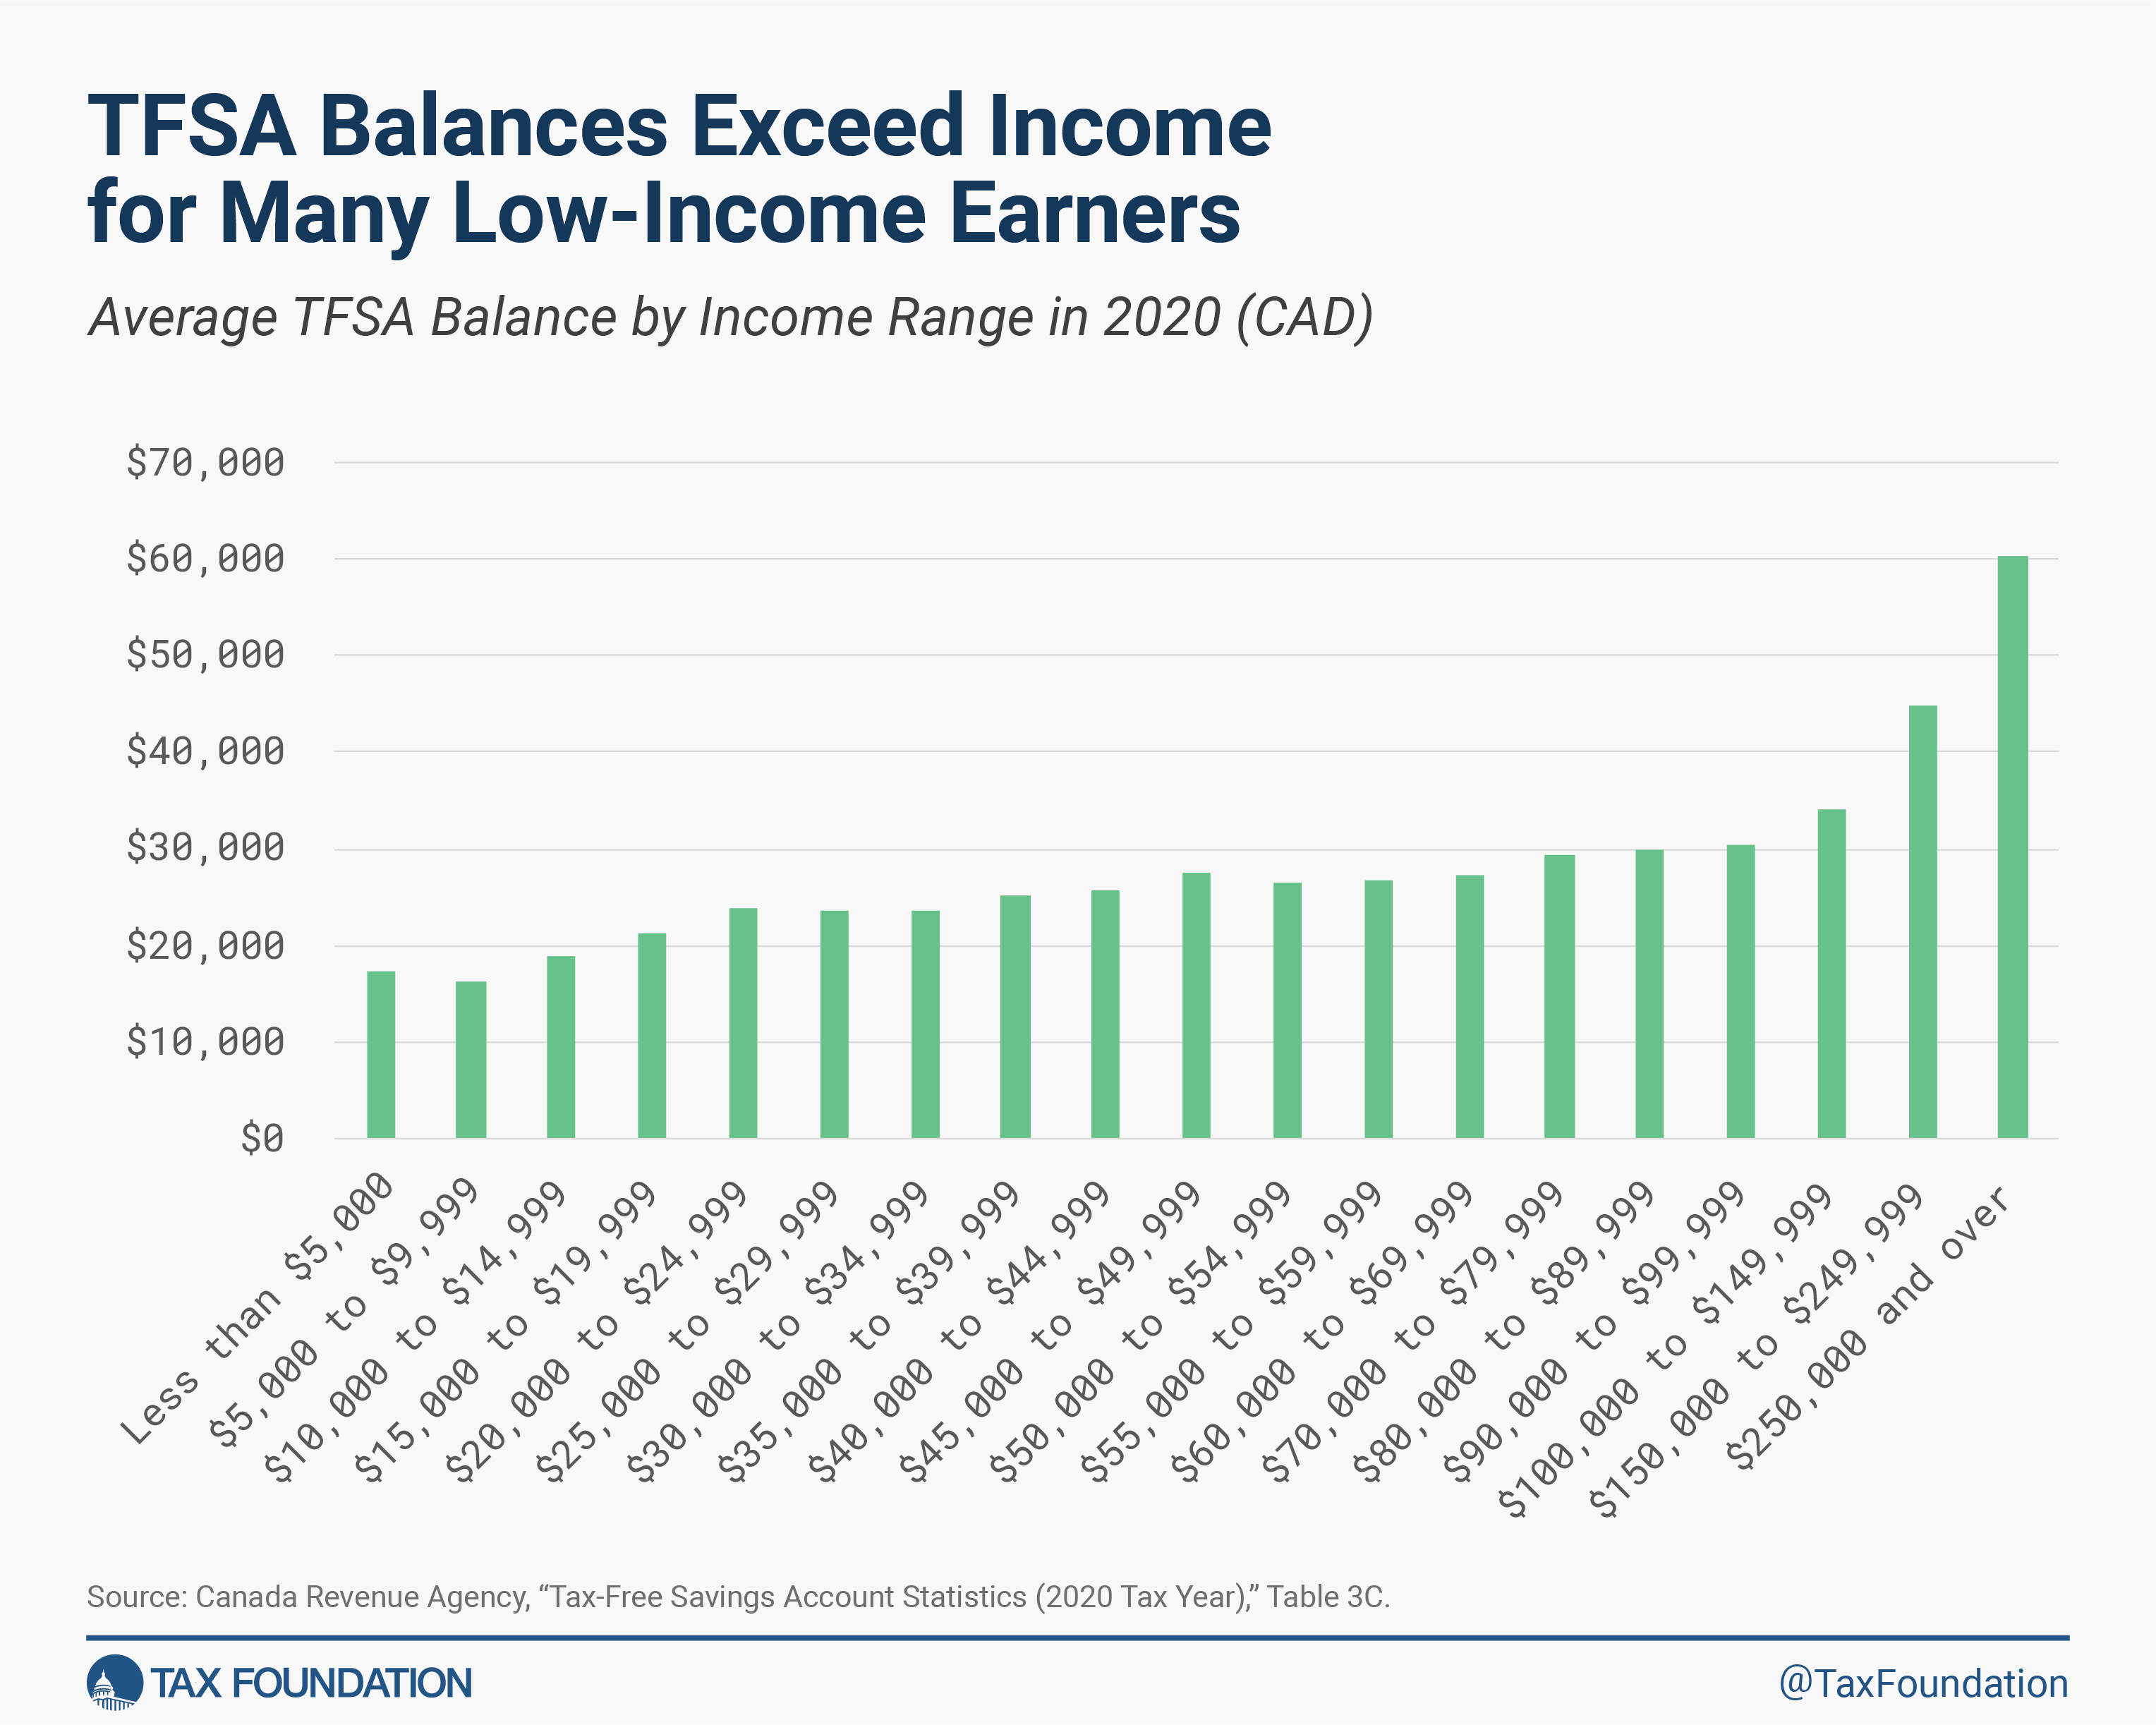 TFSA balances exceed income for many low-income earners